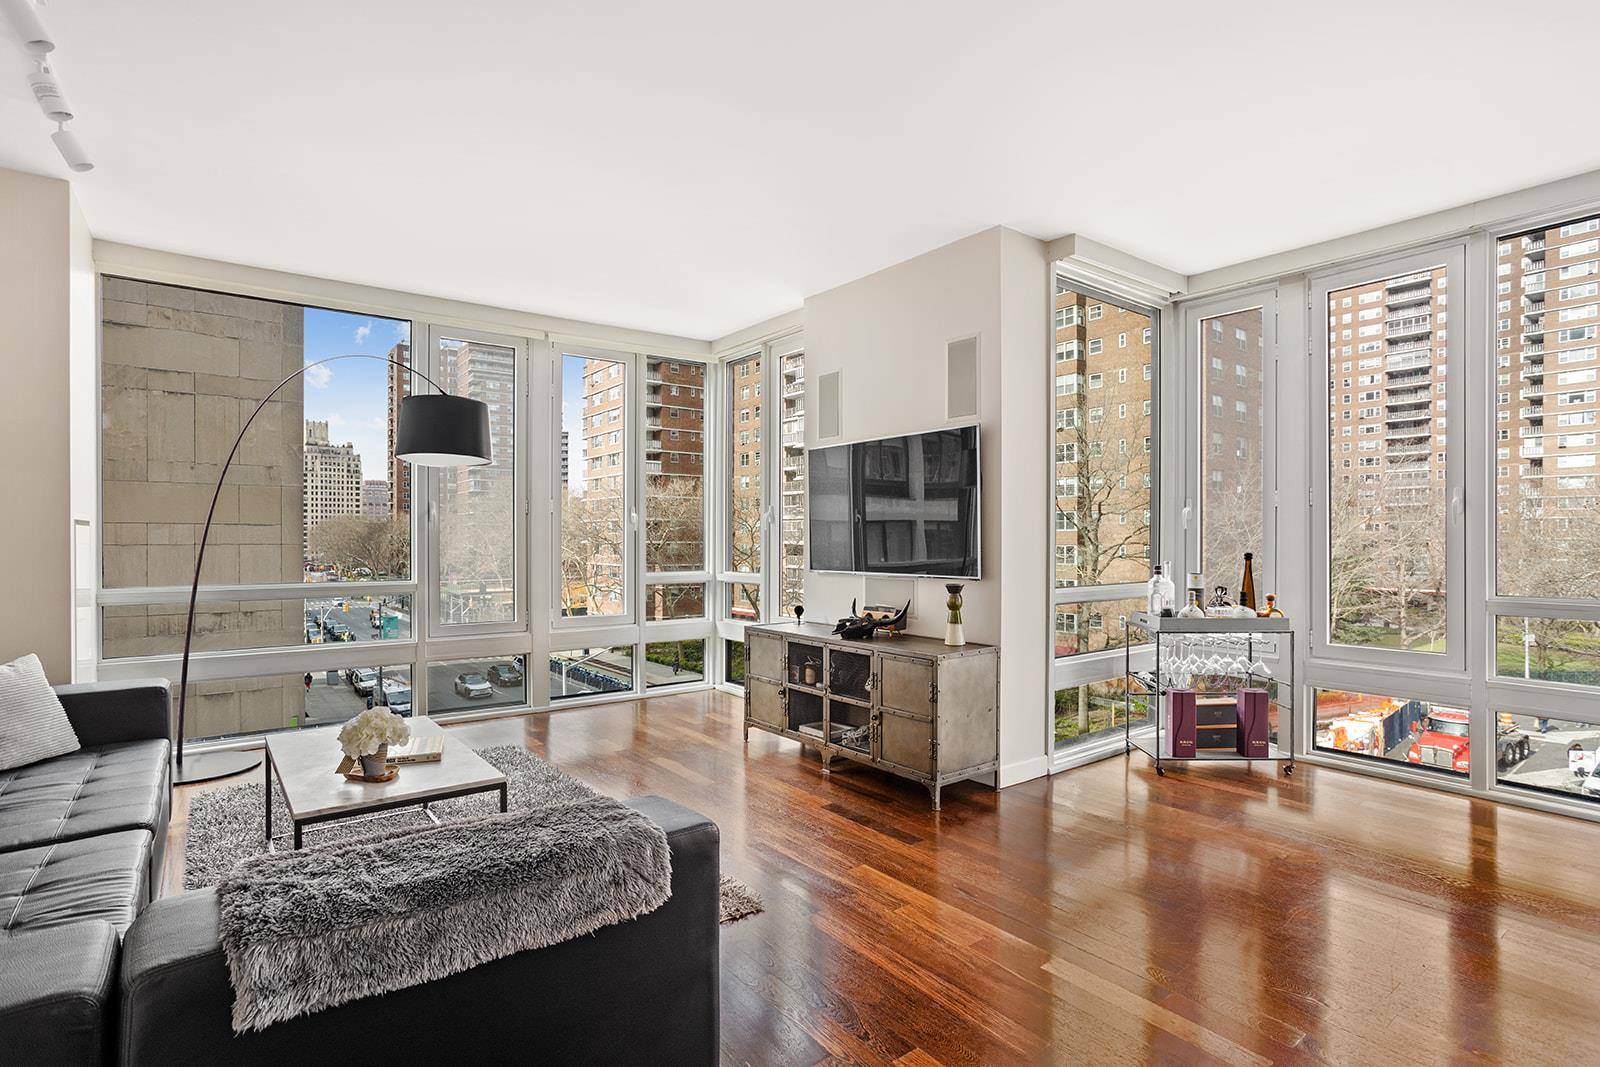 4B is a sophisticated corner residence offering a unique combination of light, serenity, and treetop views in a full service boutique condo situated in prime Chelsea.